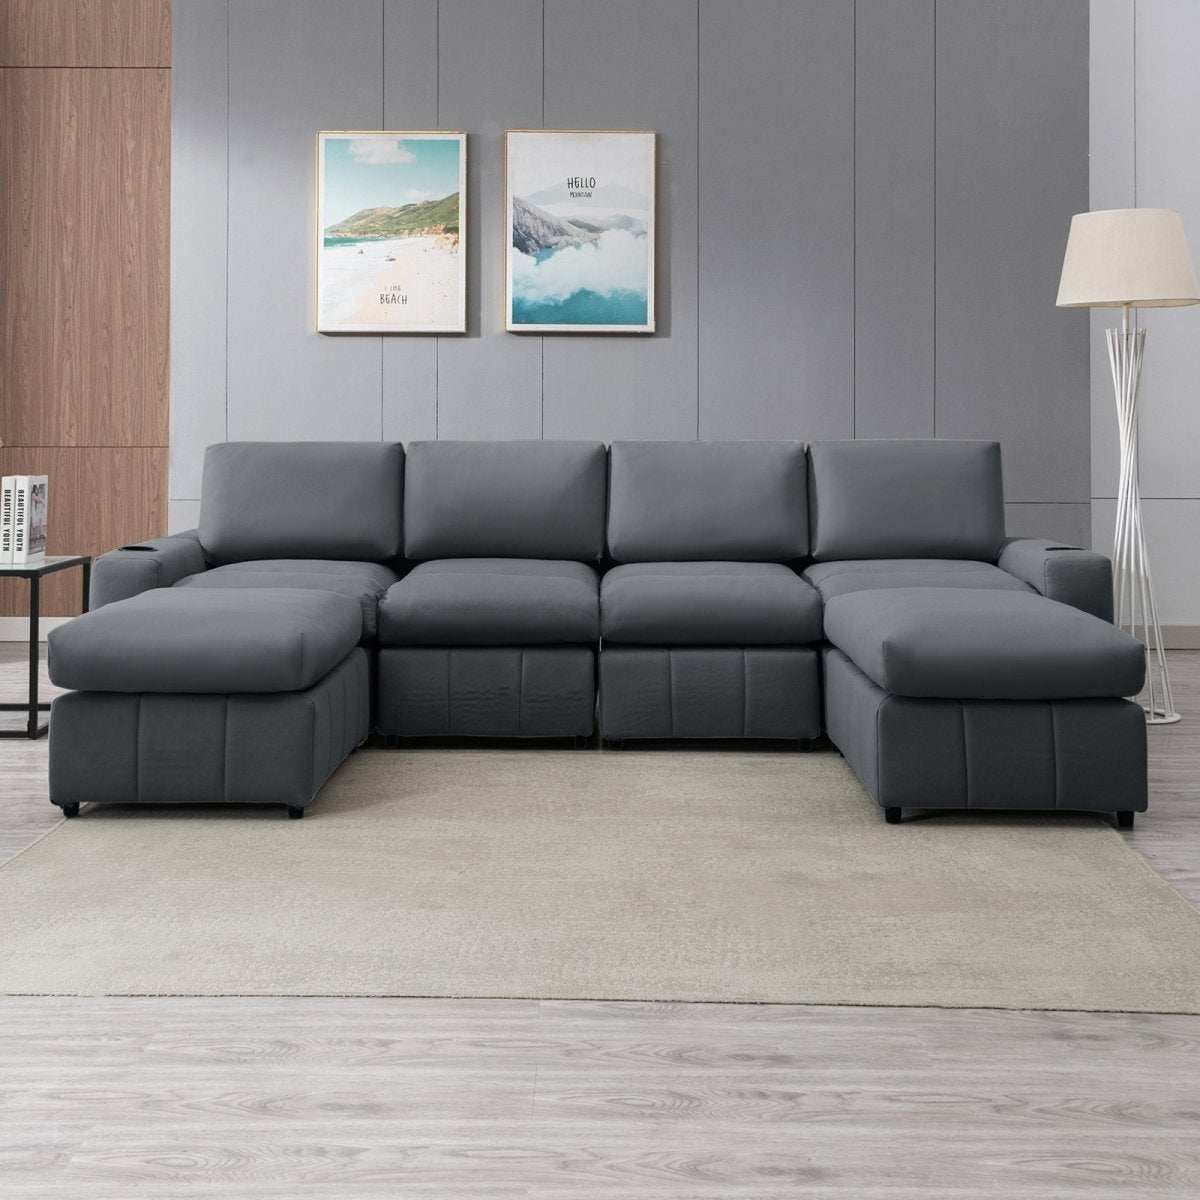 Convertible Sectional Sofa | U Shaped Modular Sectional Couch with Ottoman and Cup Holder - Mjkonesectional sofa